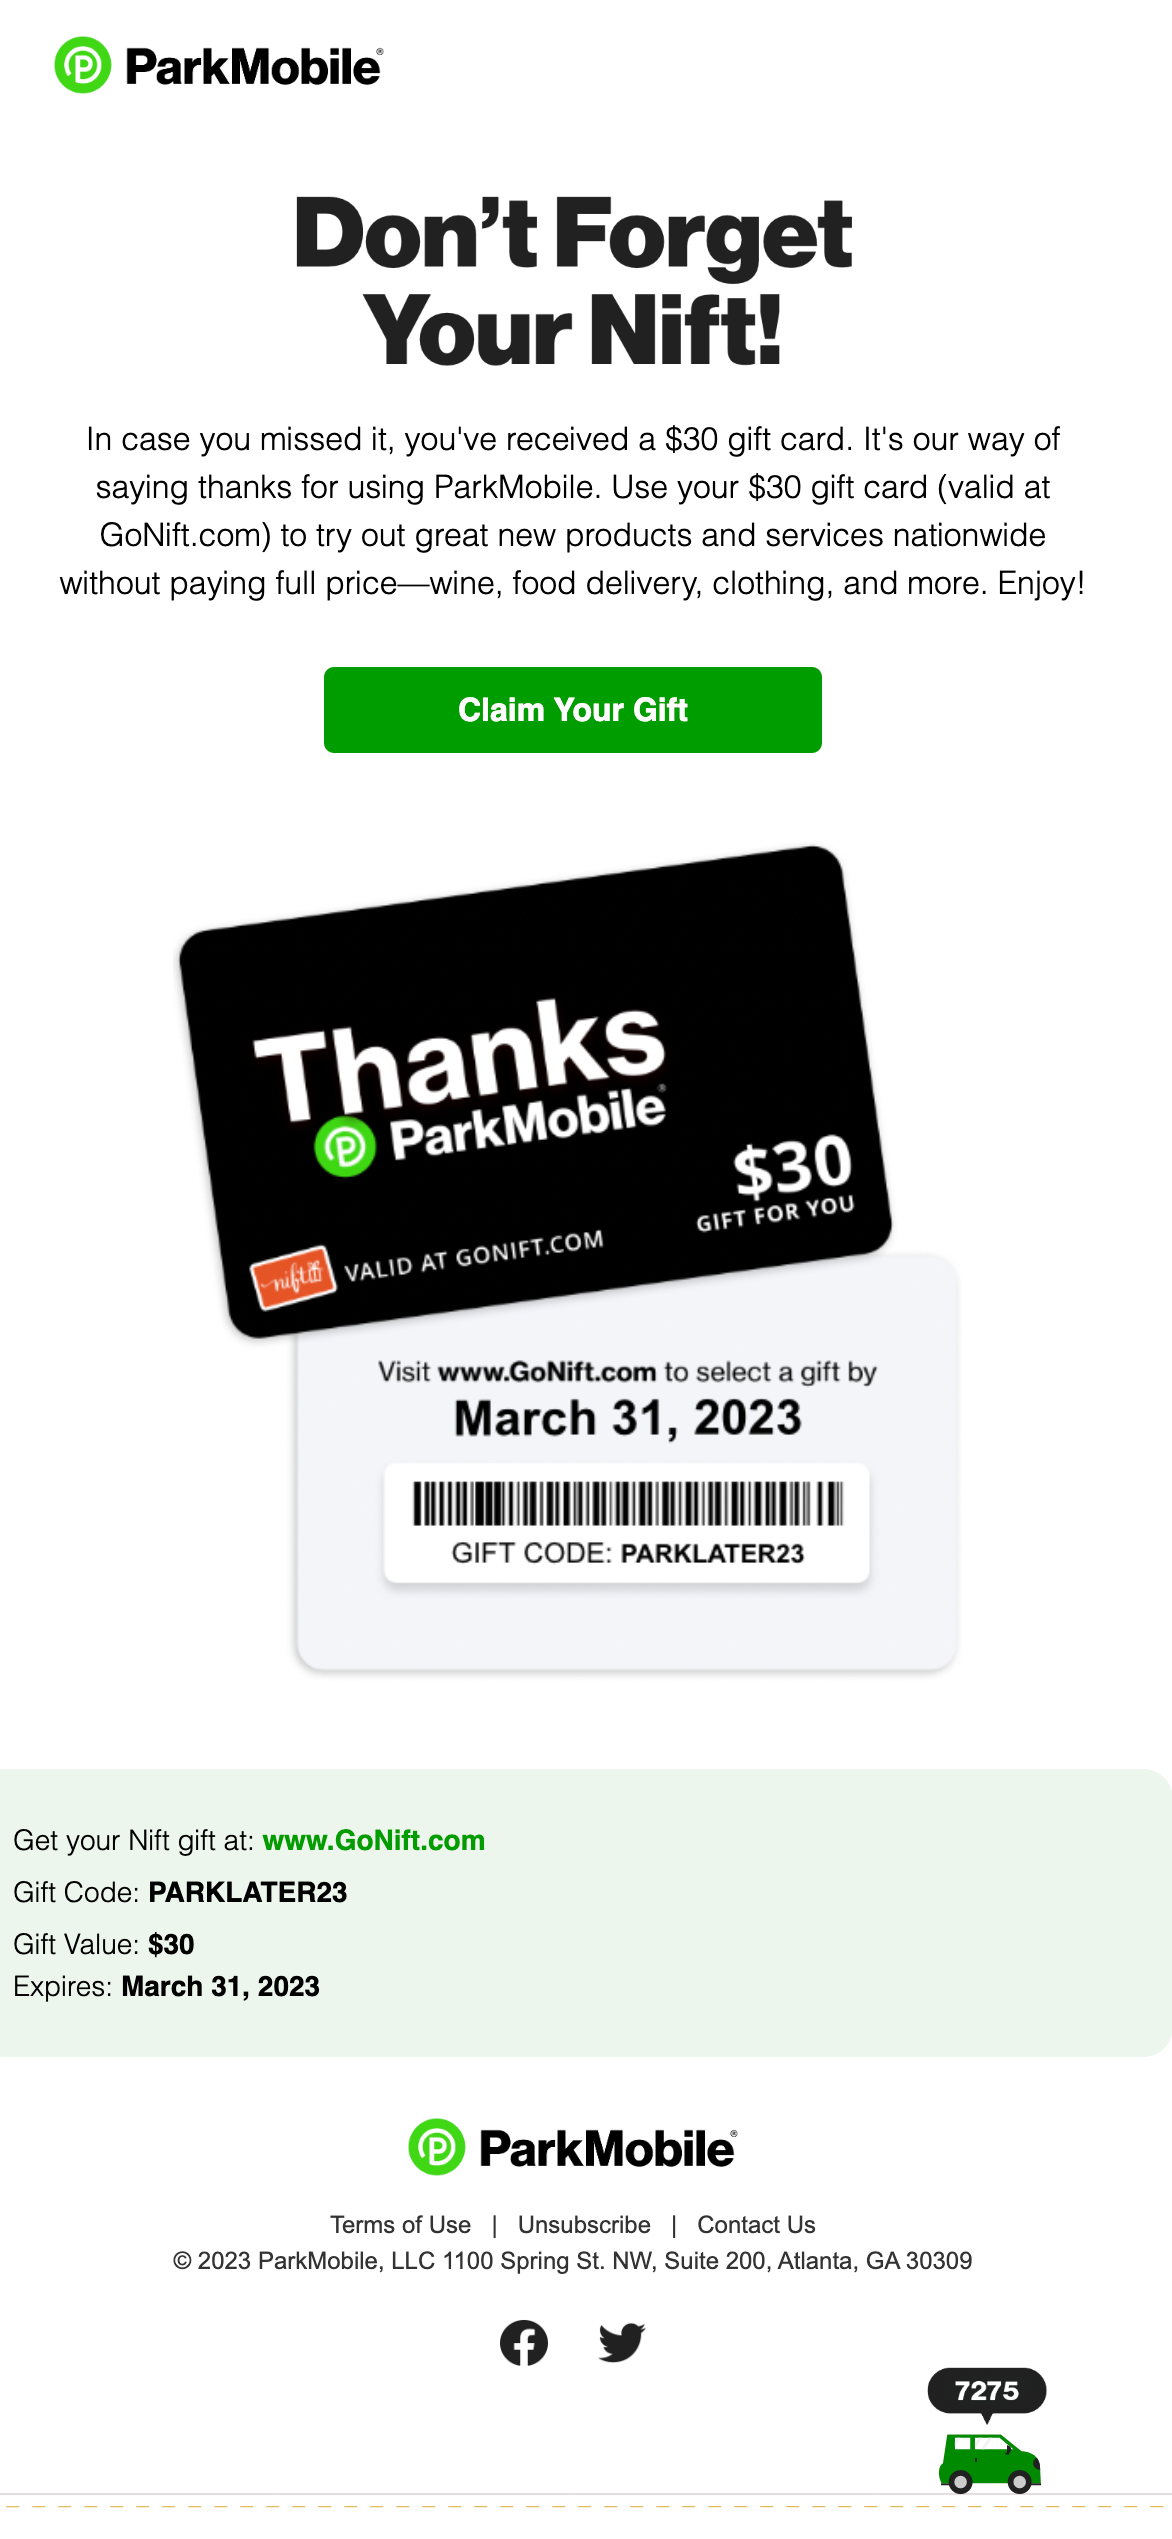 ParkMobile email on free gift card